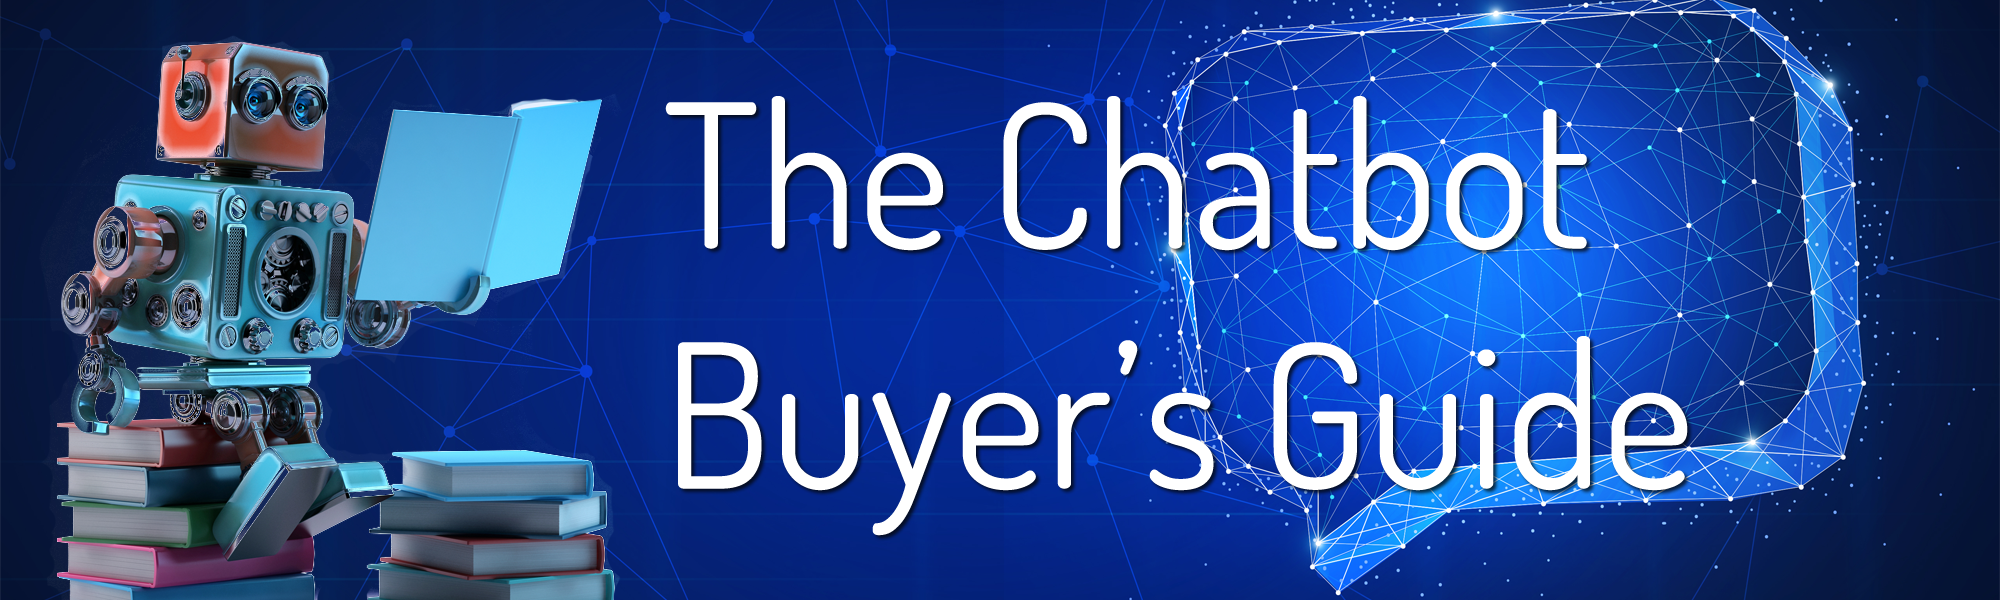 The Chatbot Buyer's Guide